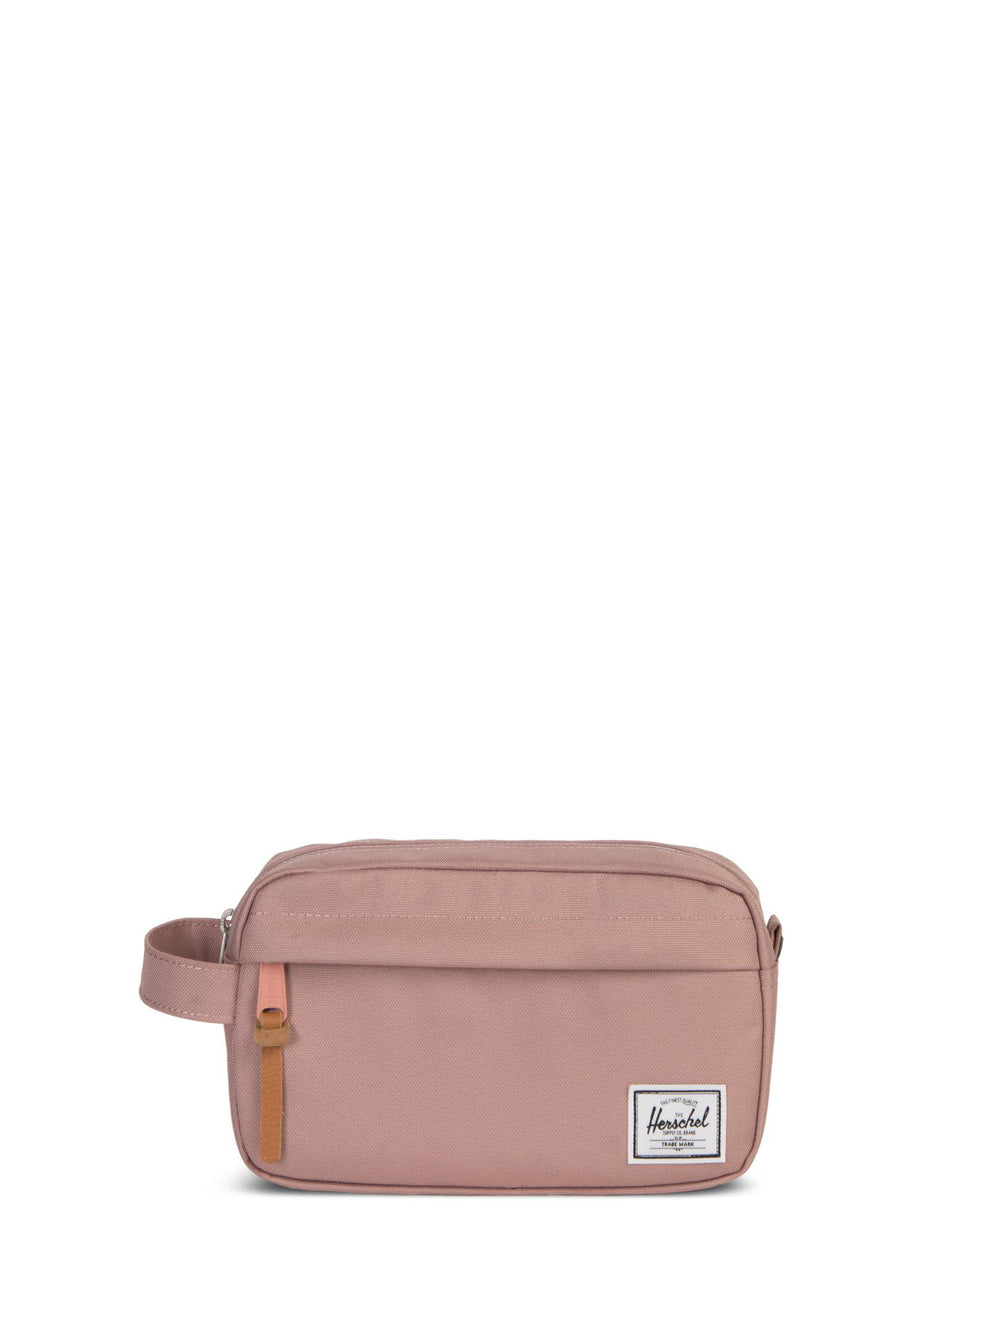 HERSCHEL SUPPLY CO. CHAPTER CARRY ON - ASH ROSE - DÉSTOCKAGE